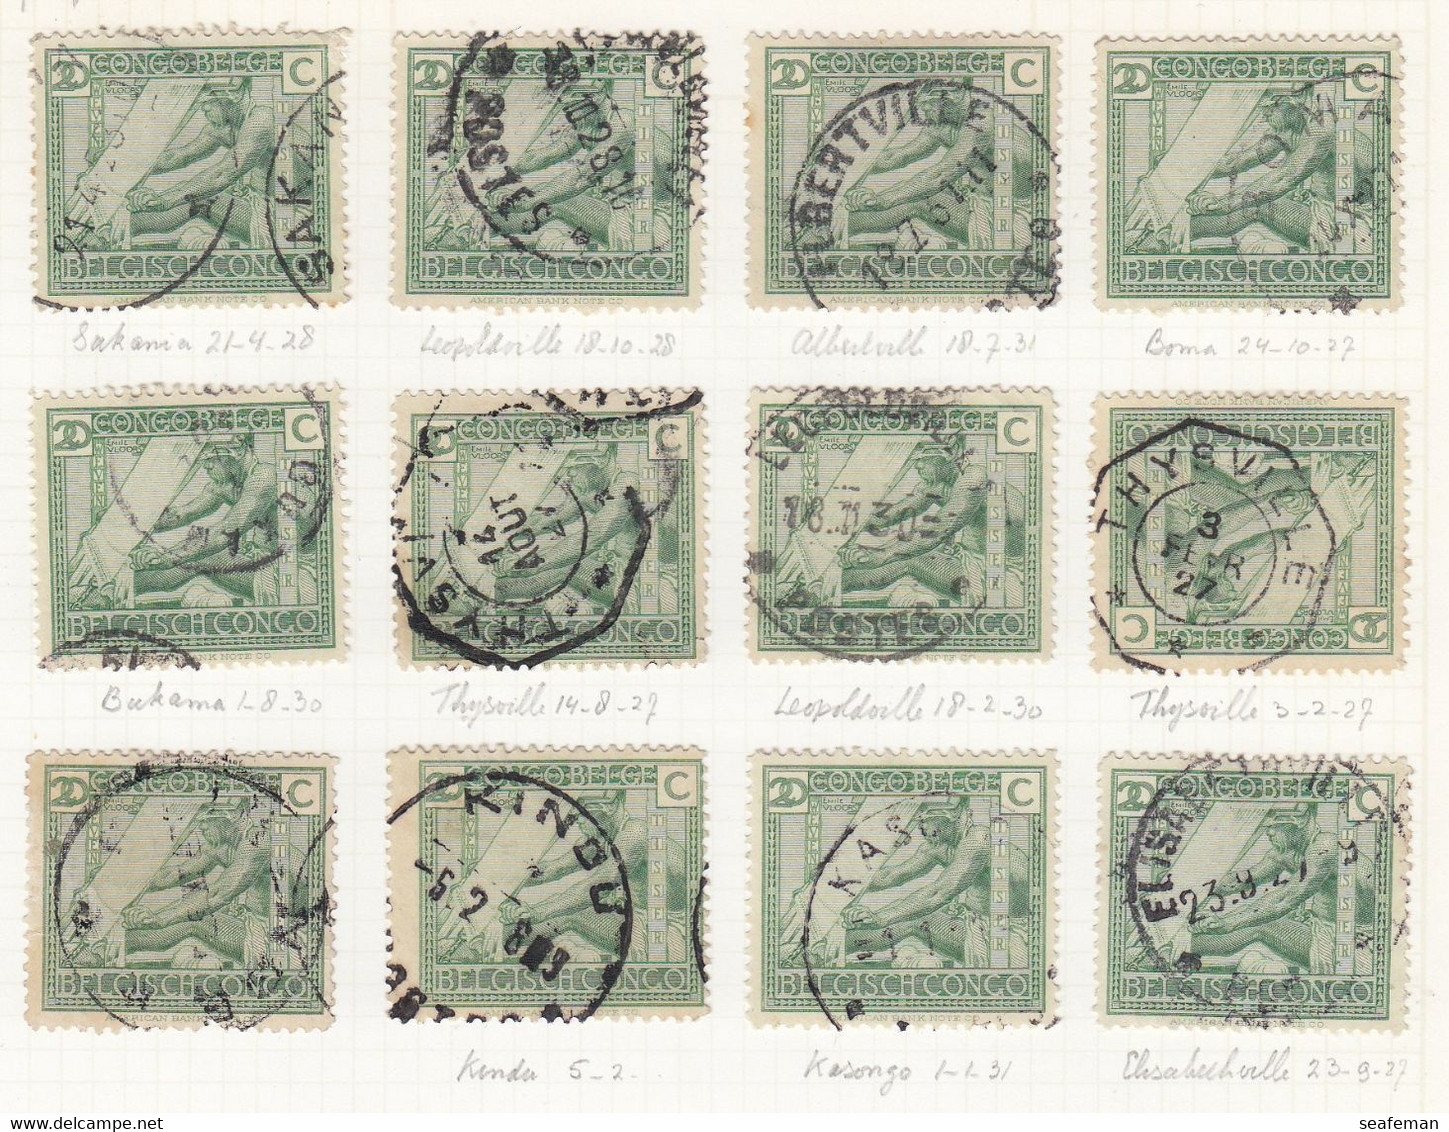 BELGIE-CONGO-many postmark + set Michel 14-25,27-29 [cw 275,00],see 96 scans [81BC]